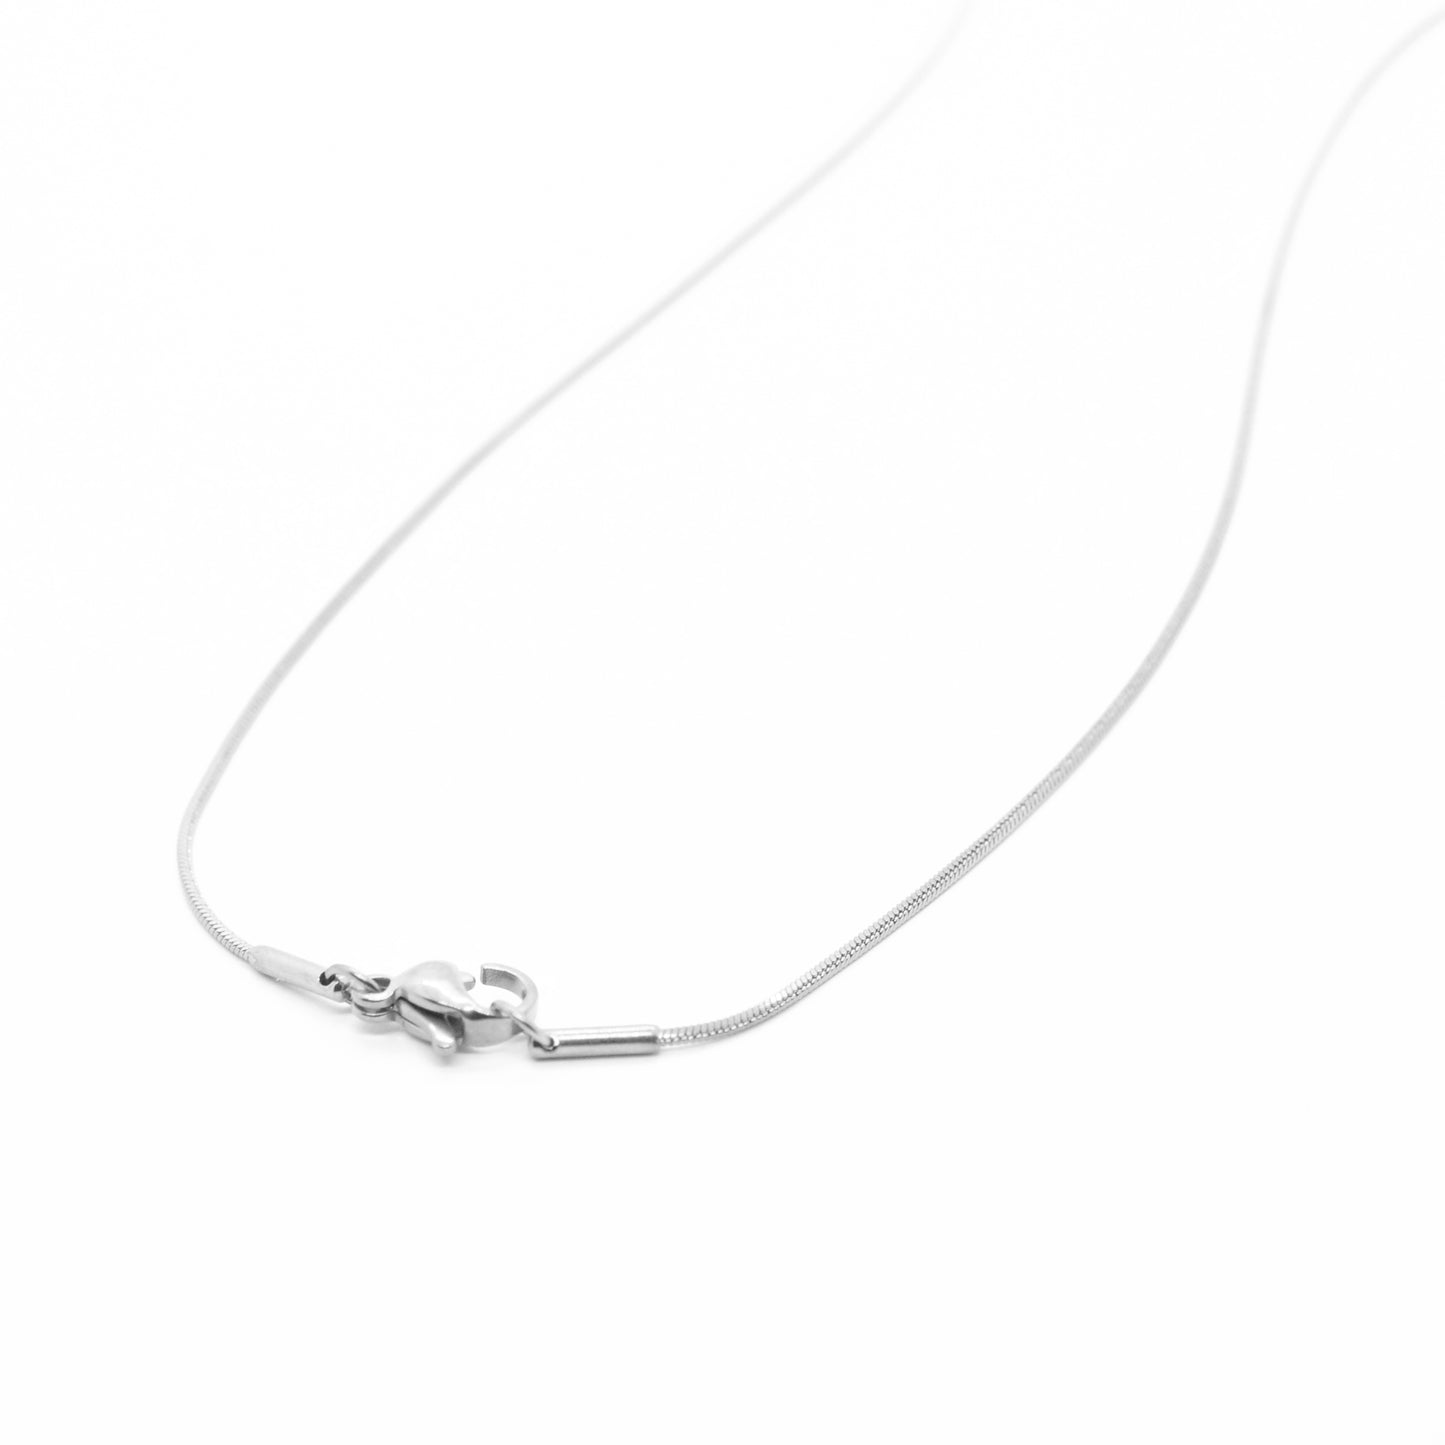 Stainless steel necklace snake chain / silver colored / 45 cm